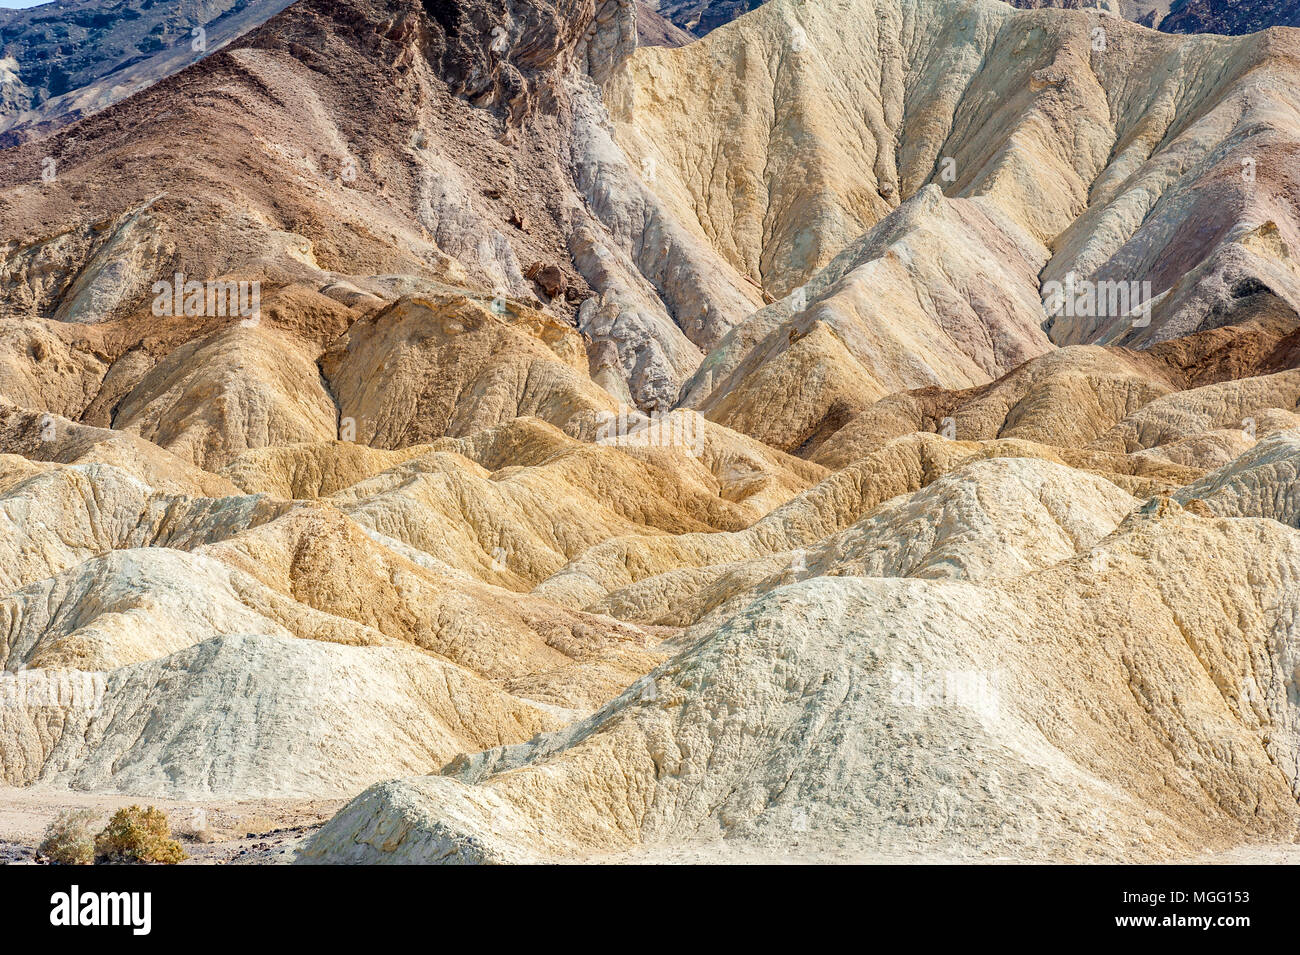 Erosional landscape of Zabriskie Point in Death Valley National Park, California, USA Stock Photo